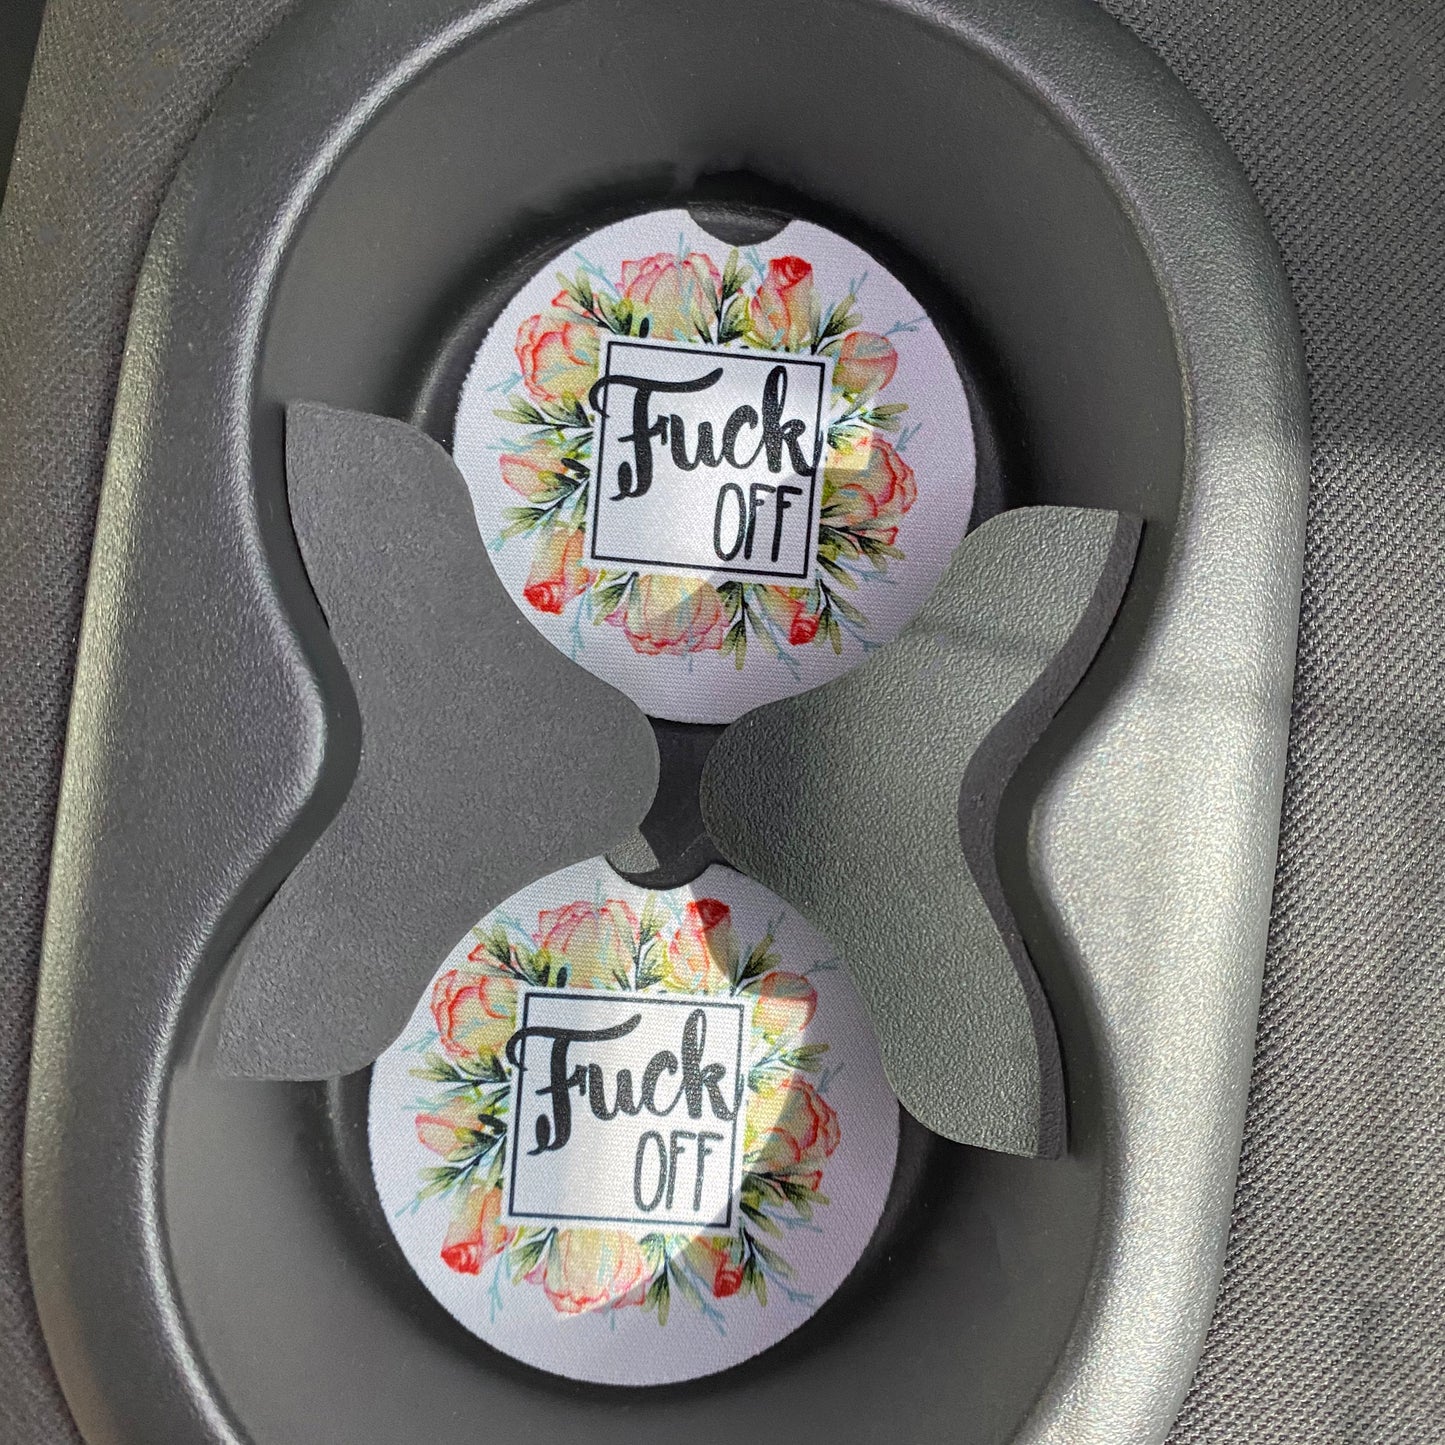 Fuck off Car coaster, car accessories, cup holder, vehicle accessory, pretty, vulgar, curse word, sarcastic, white elephant, favorite f word, gift, birthday, mothers day, friend, unique